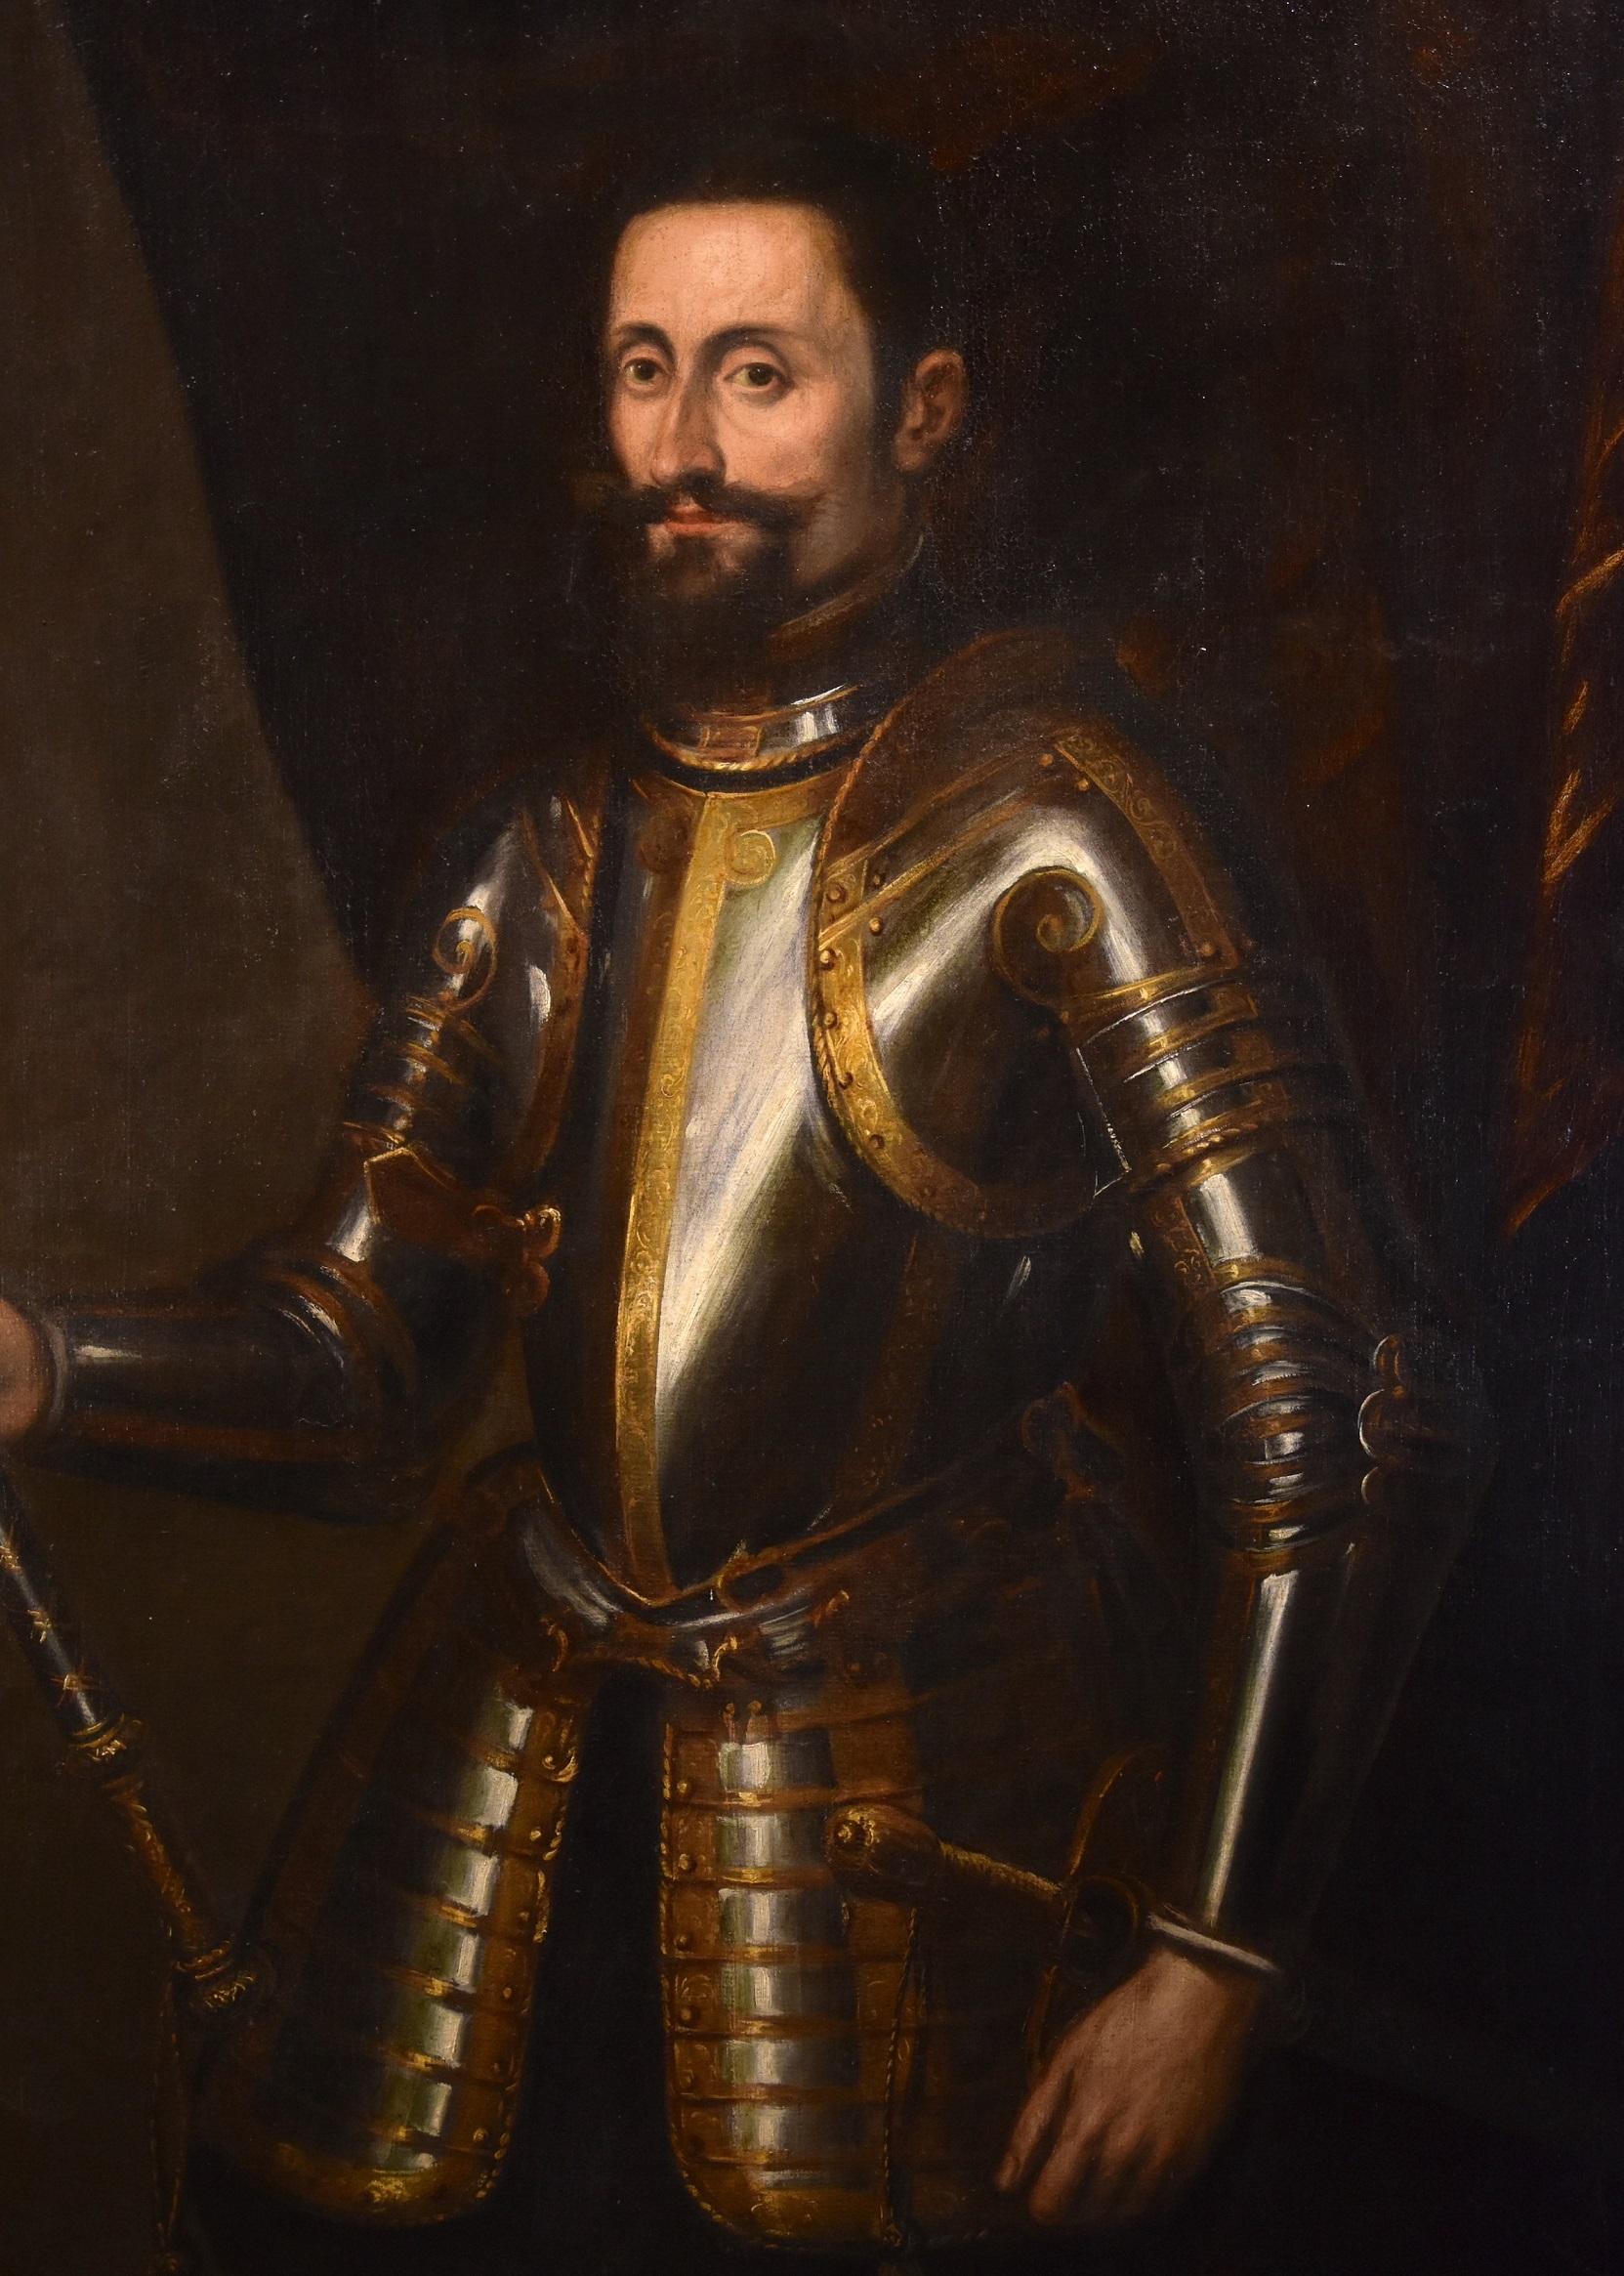 Portrait Knight Armour Titian Paint Oil on canvas Old master 16/17th Century - Old Masters Painting by Titian painter of the late 16th century